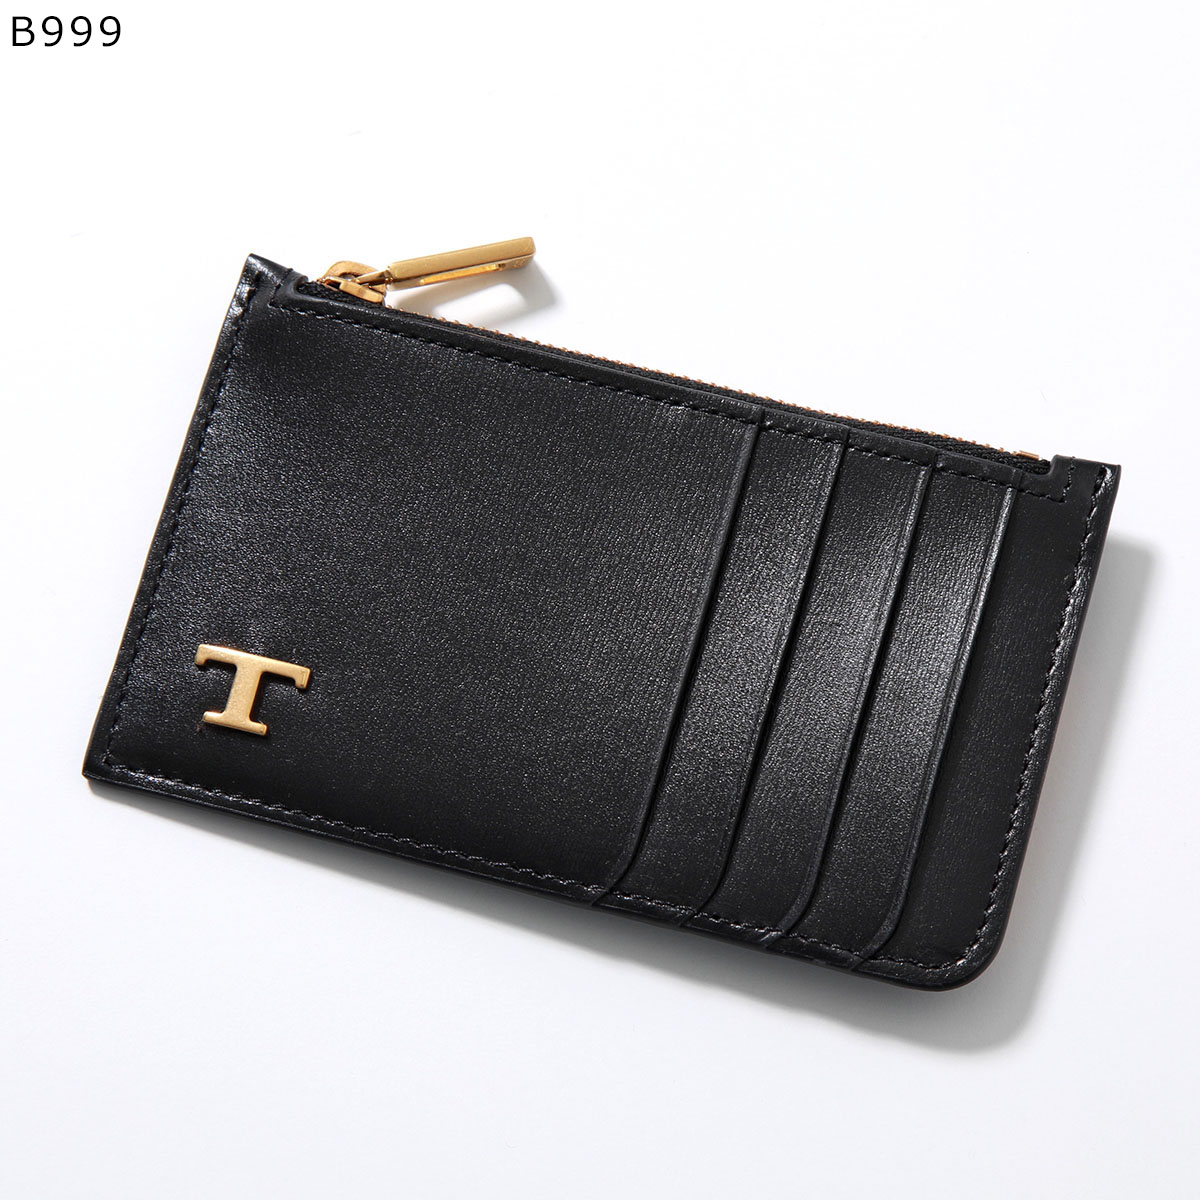 TODS トッズ コインケース カードケース T TIMELESS Tタイムレス